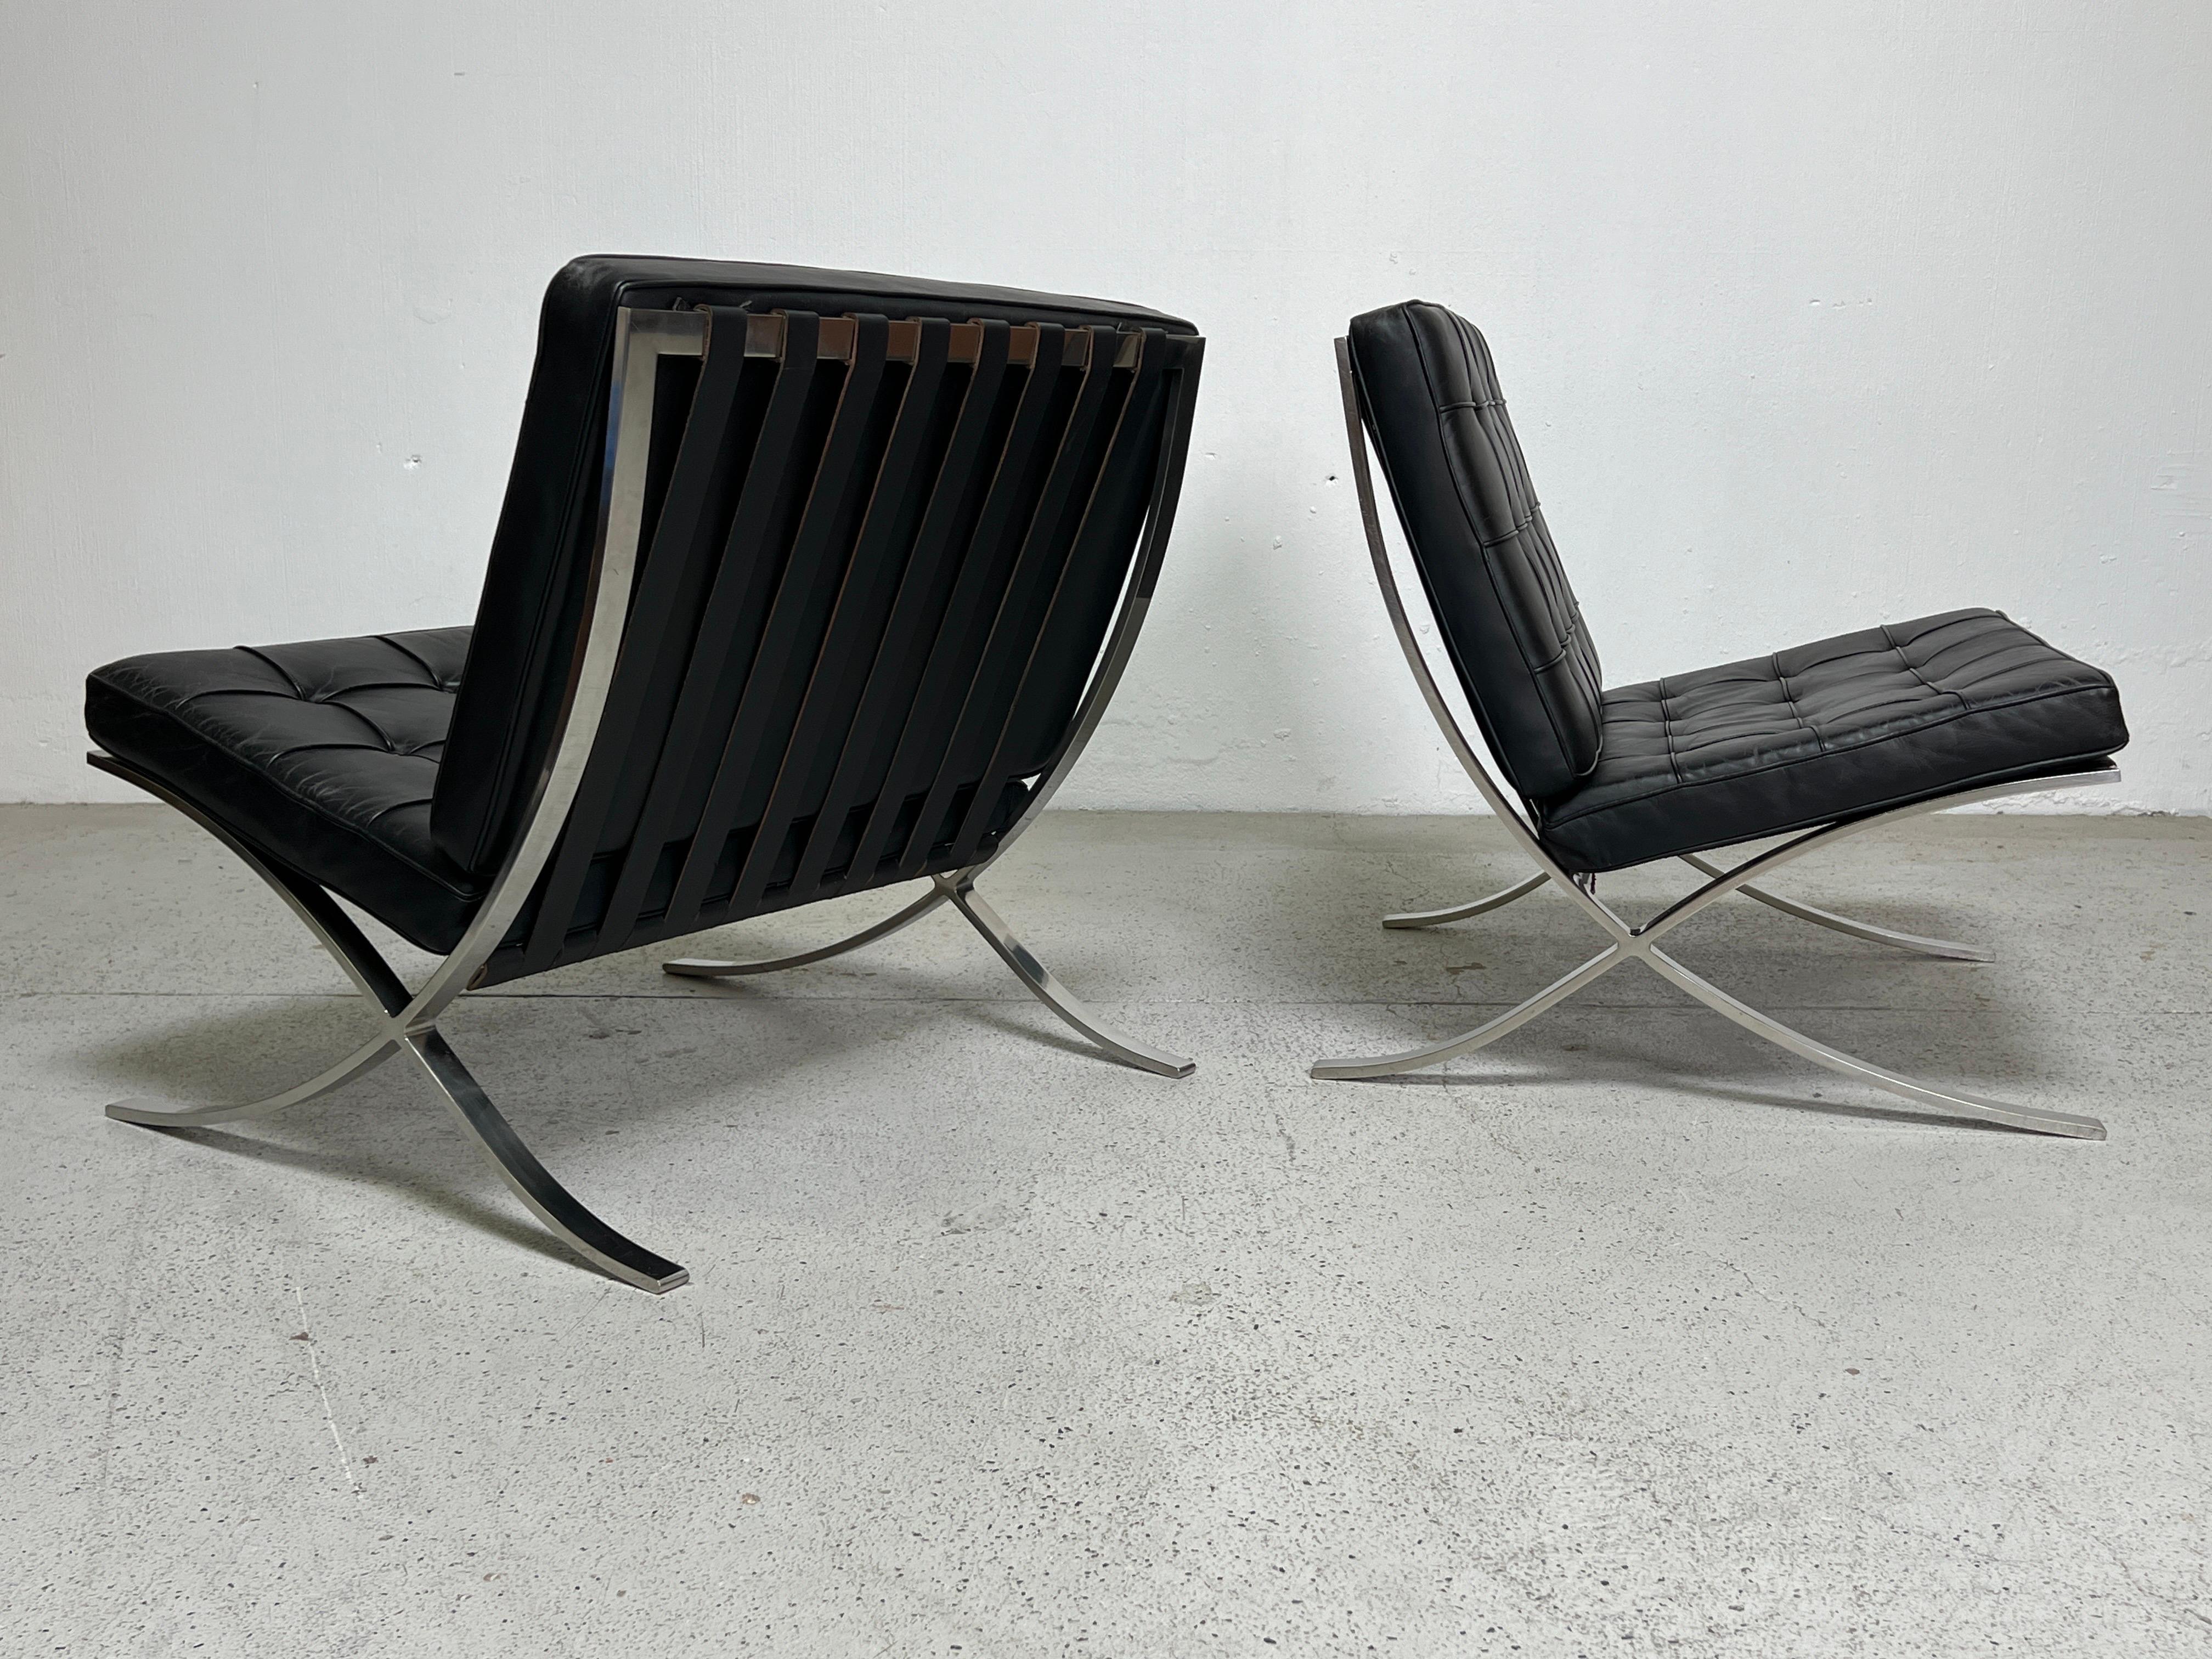 Stainless Steel Pair of Vintage Barcelona Chairs by Mies van der Rohe For Sale